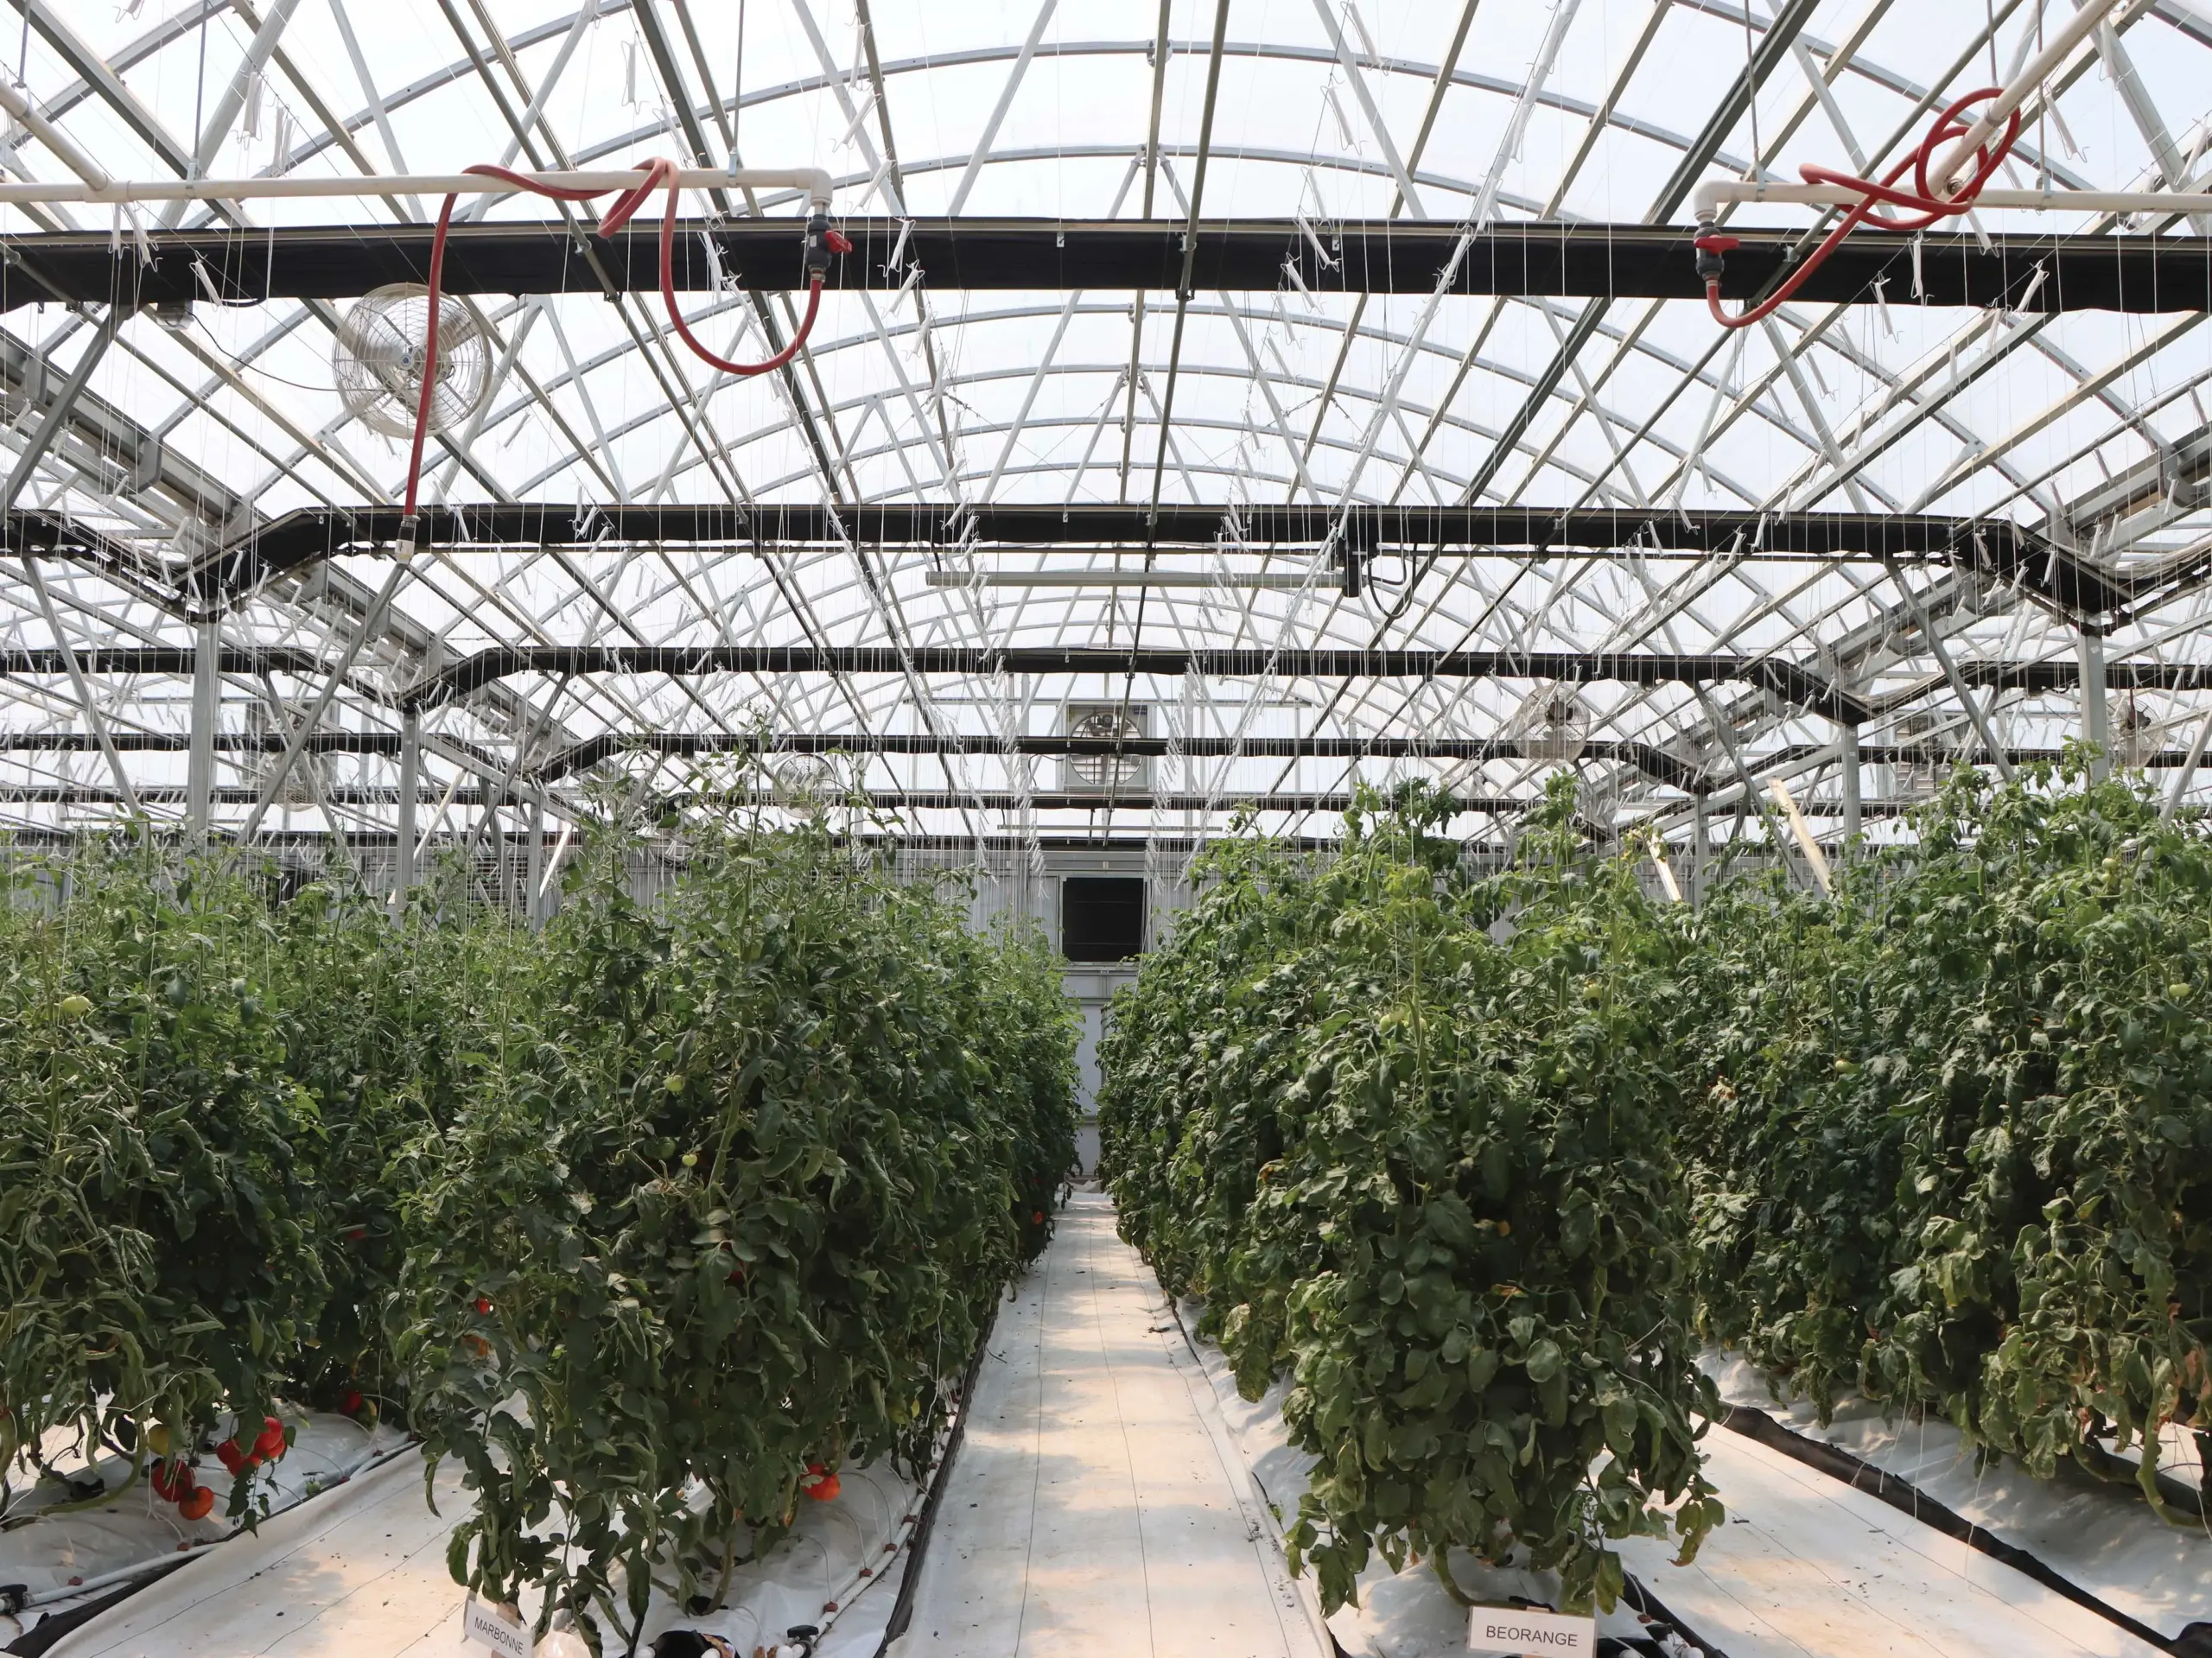 tomato plants growing inside a greenhouse. Light dep systems, lights, fans and more are hanging from ceiling